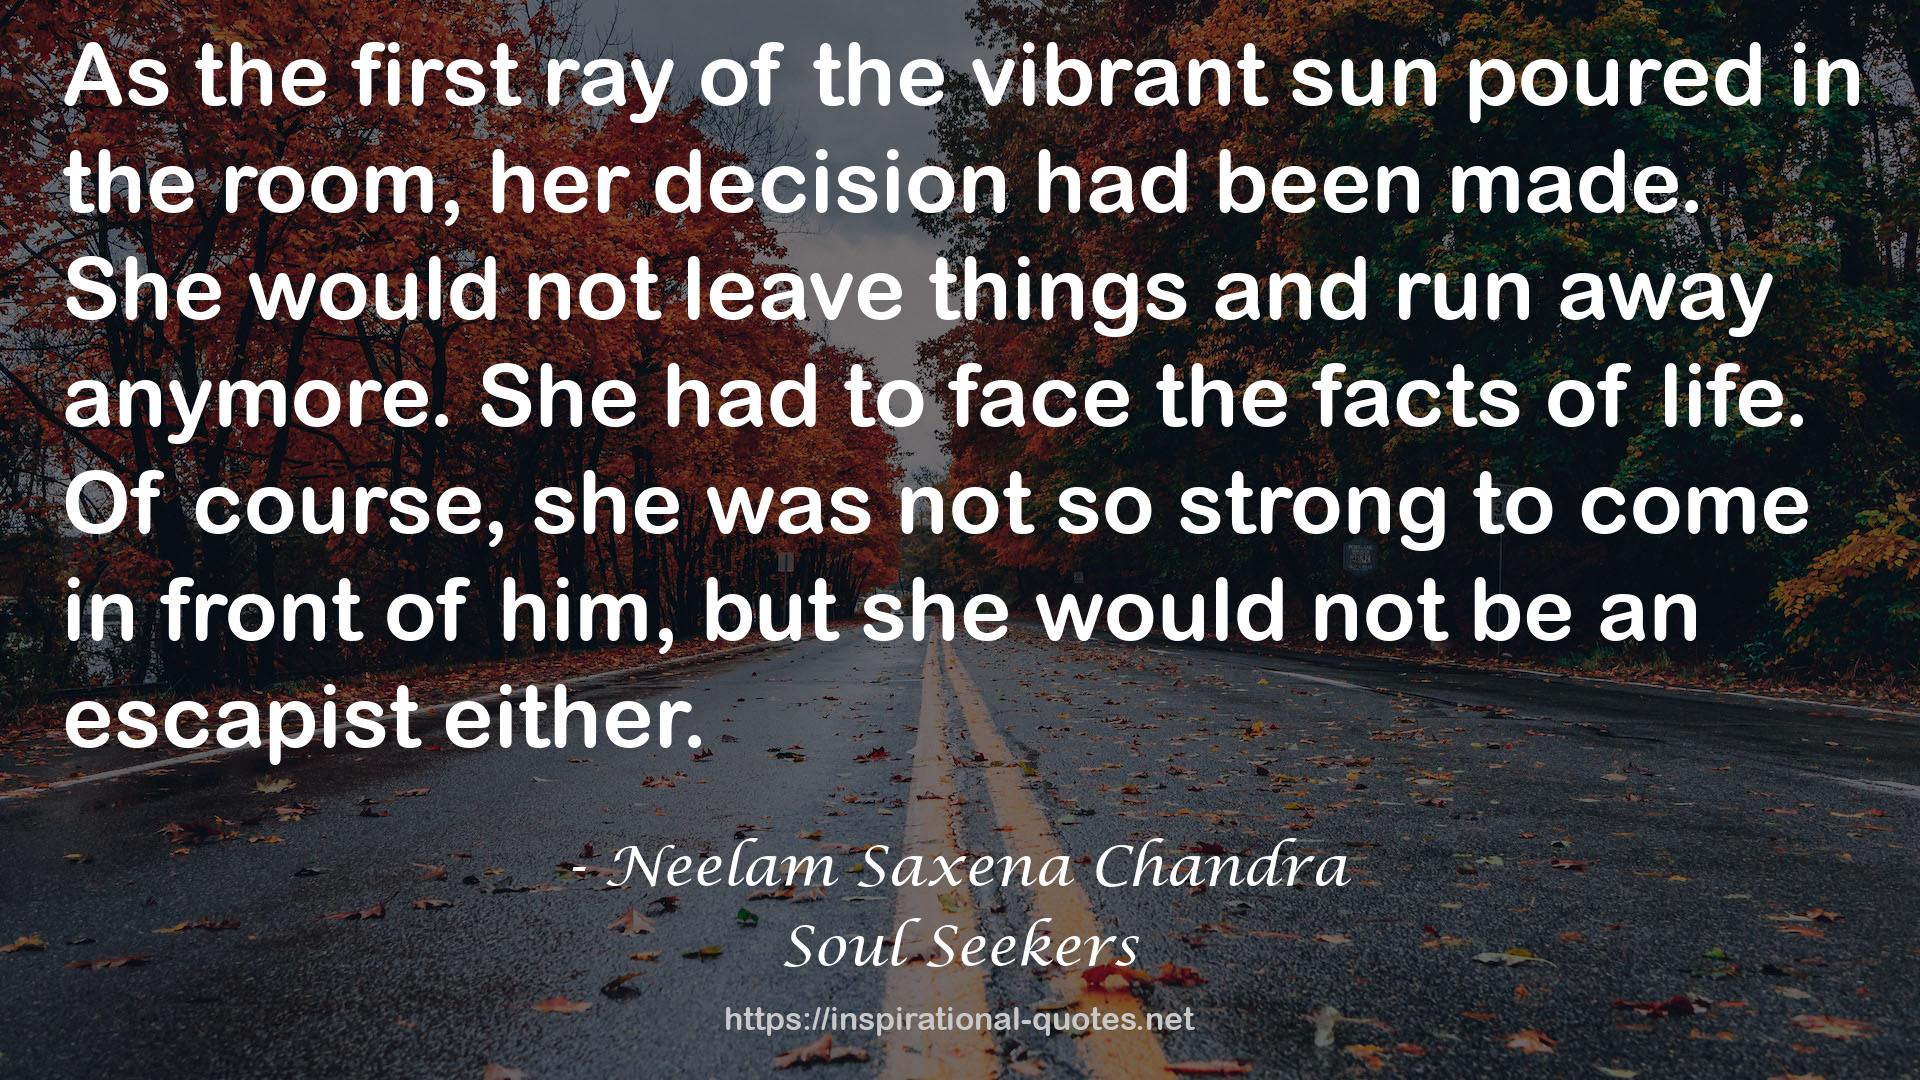 Soul Seekers QUOTES